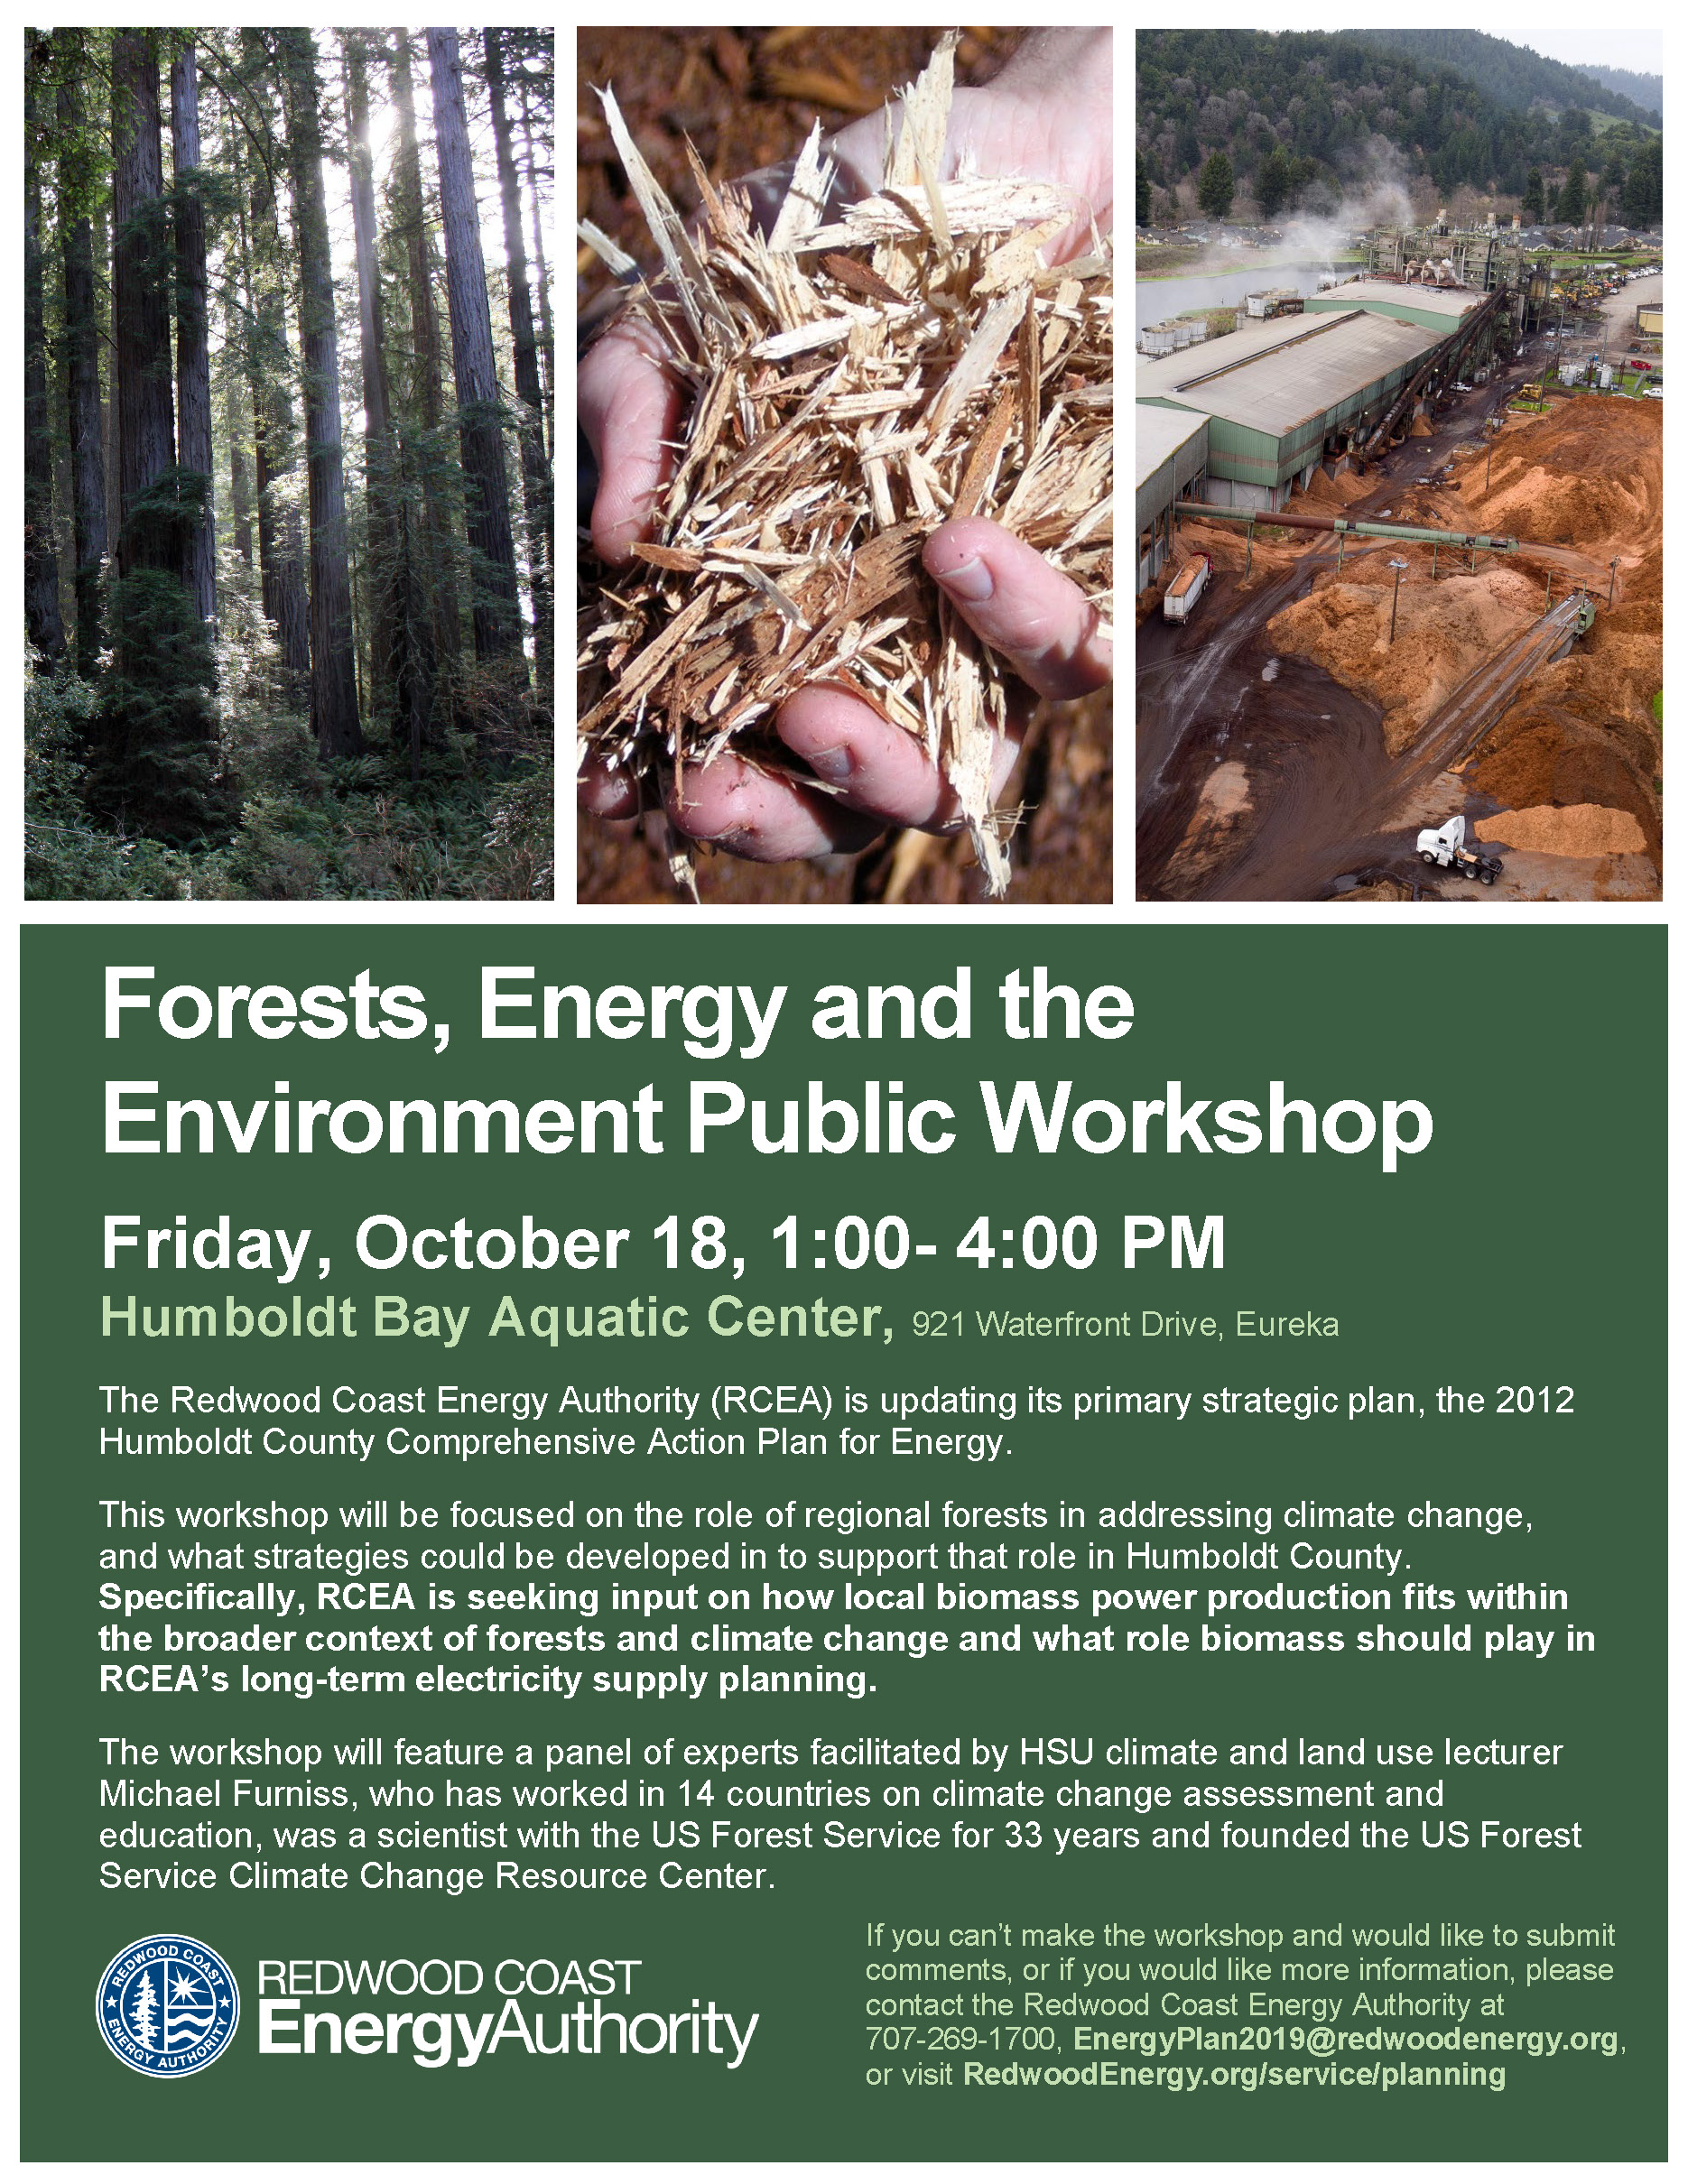 Forests Energy and the Environment Public Workshop flyer